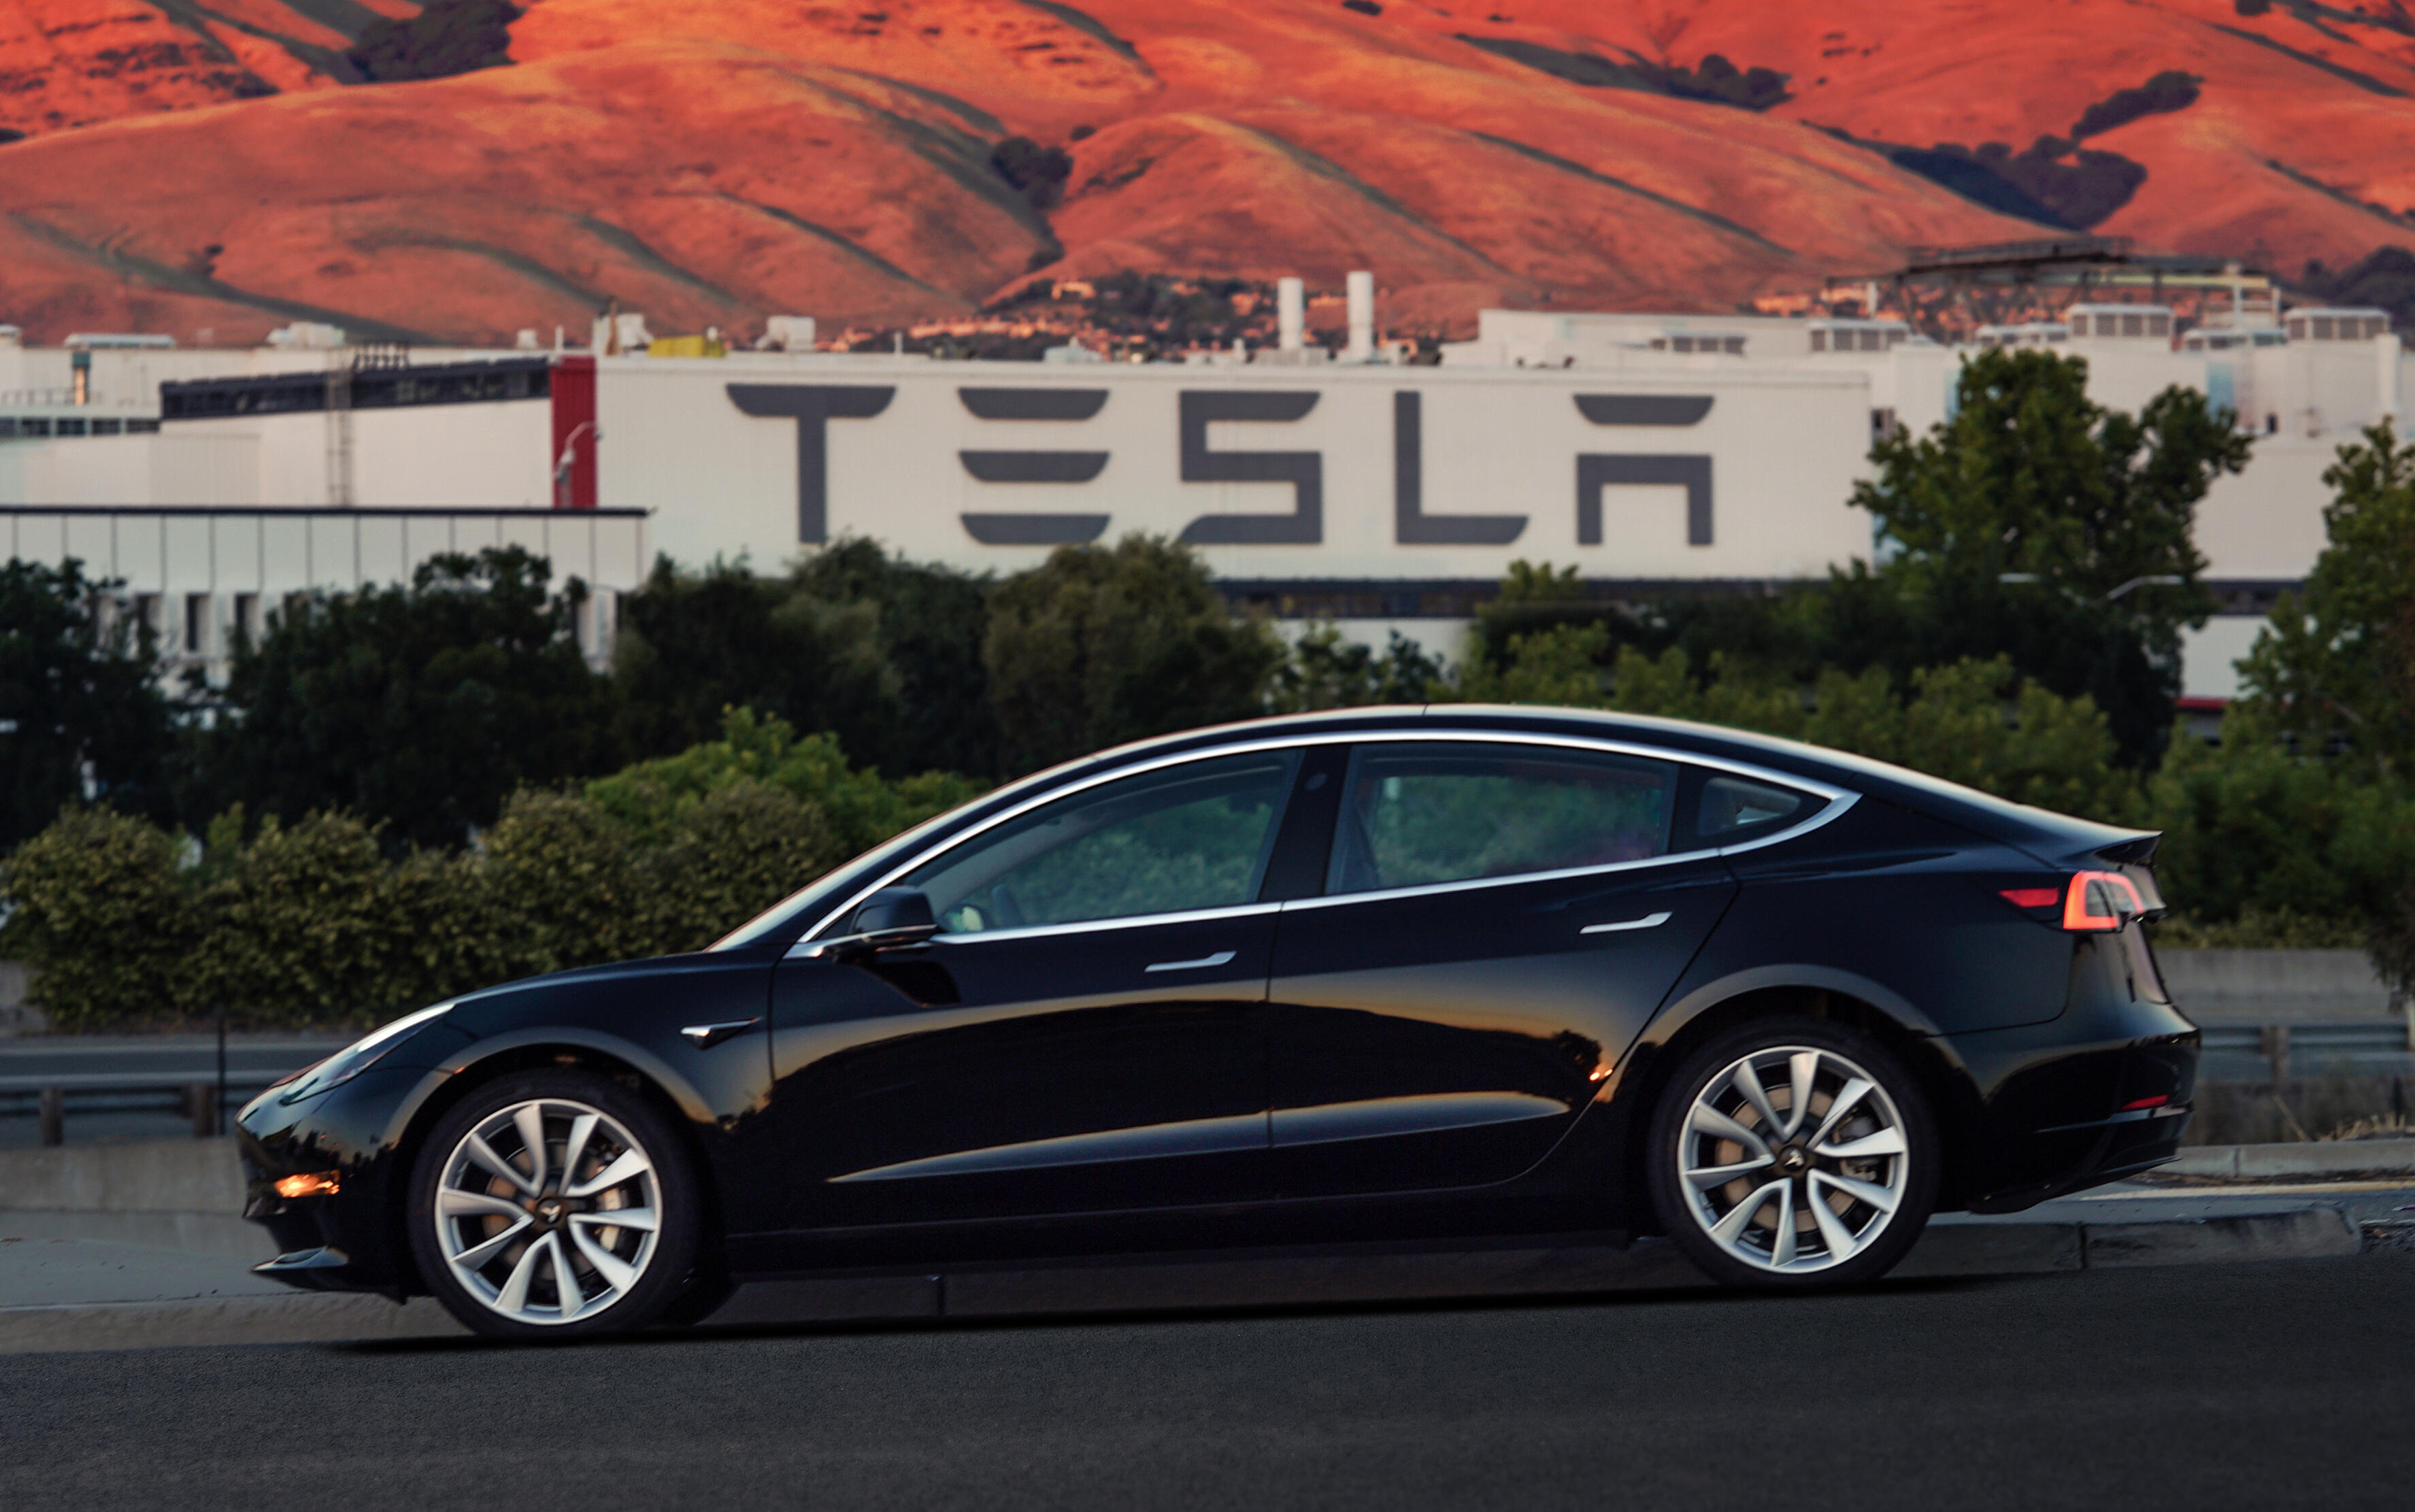 The New Tesla Model 3 Electric Car Is Now On Display In Scottsdale